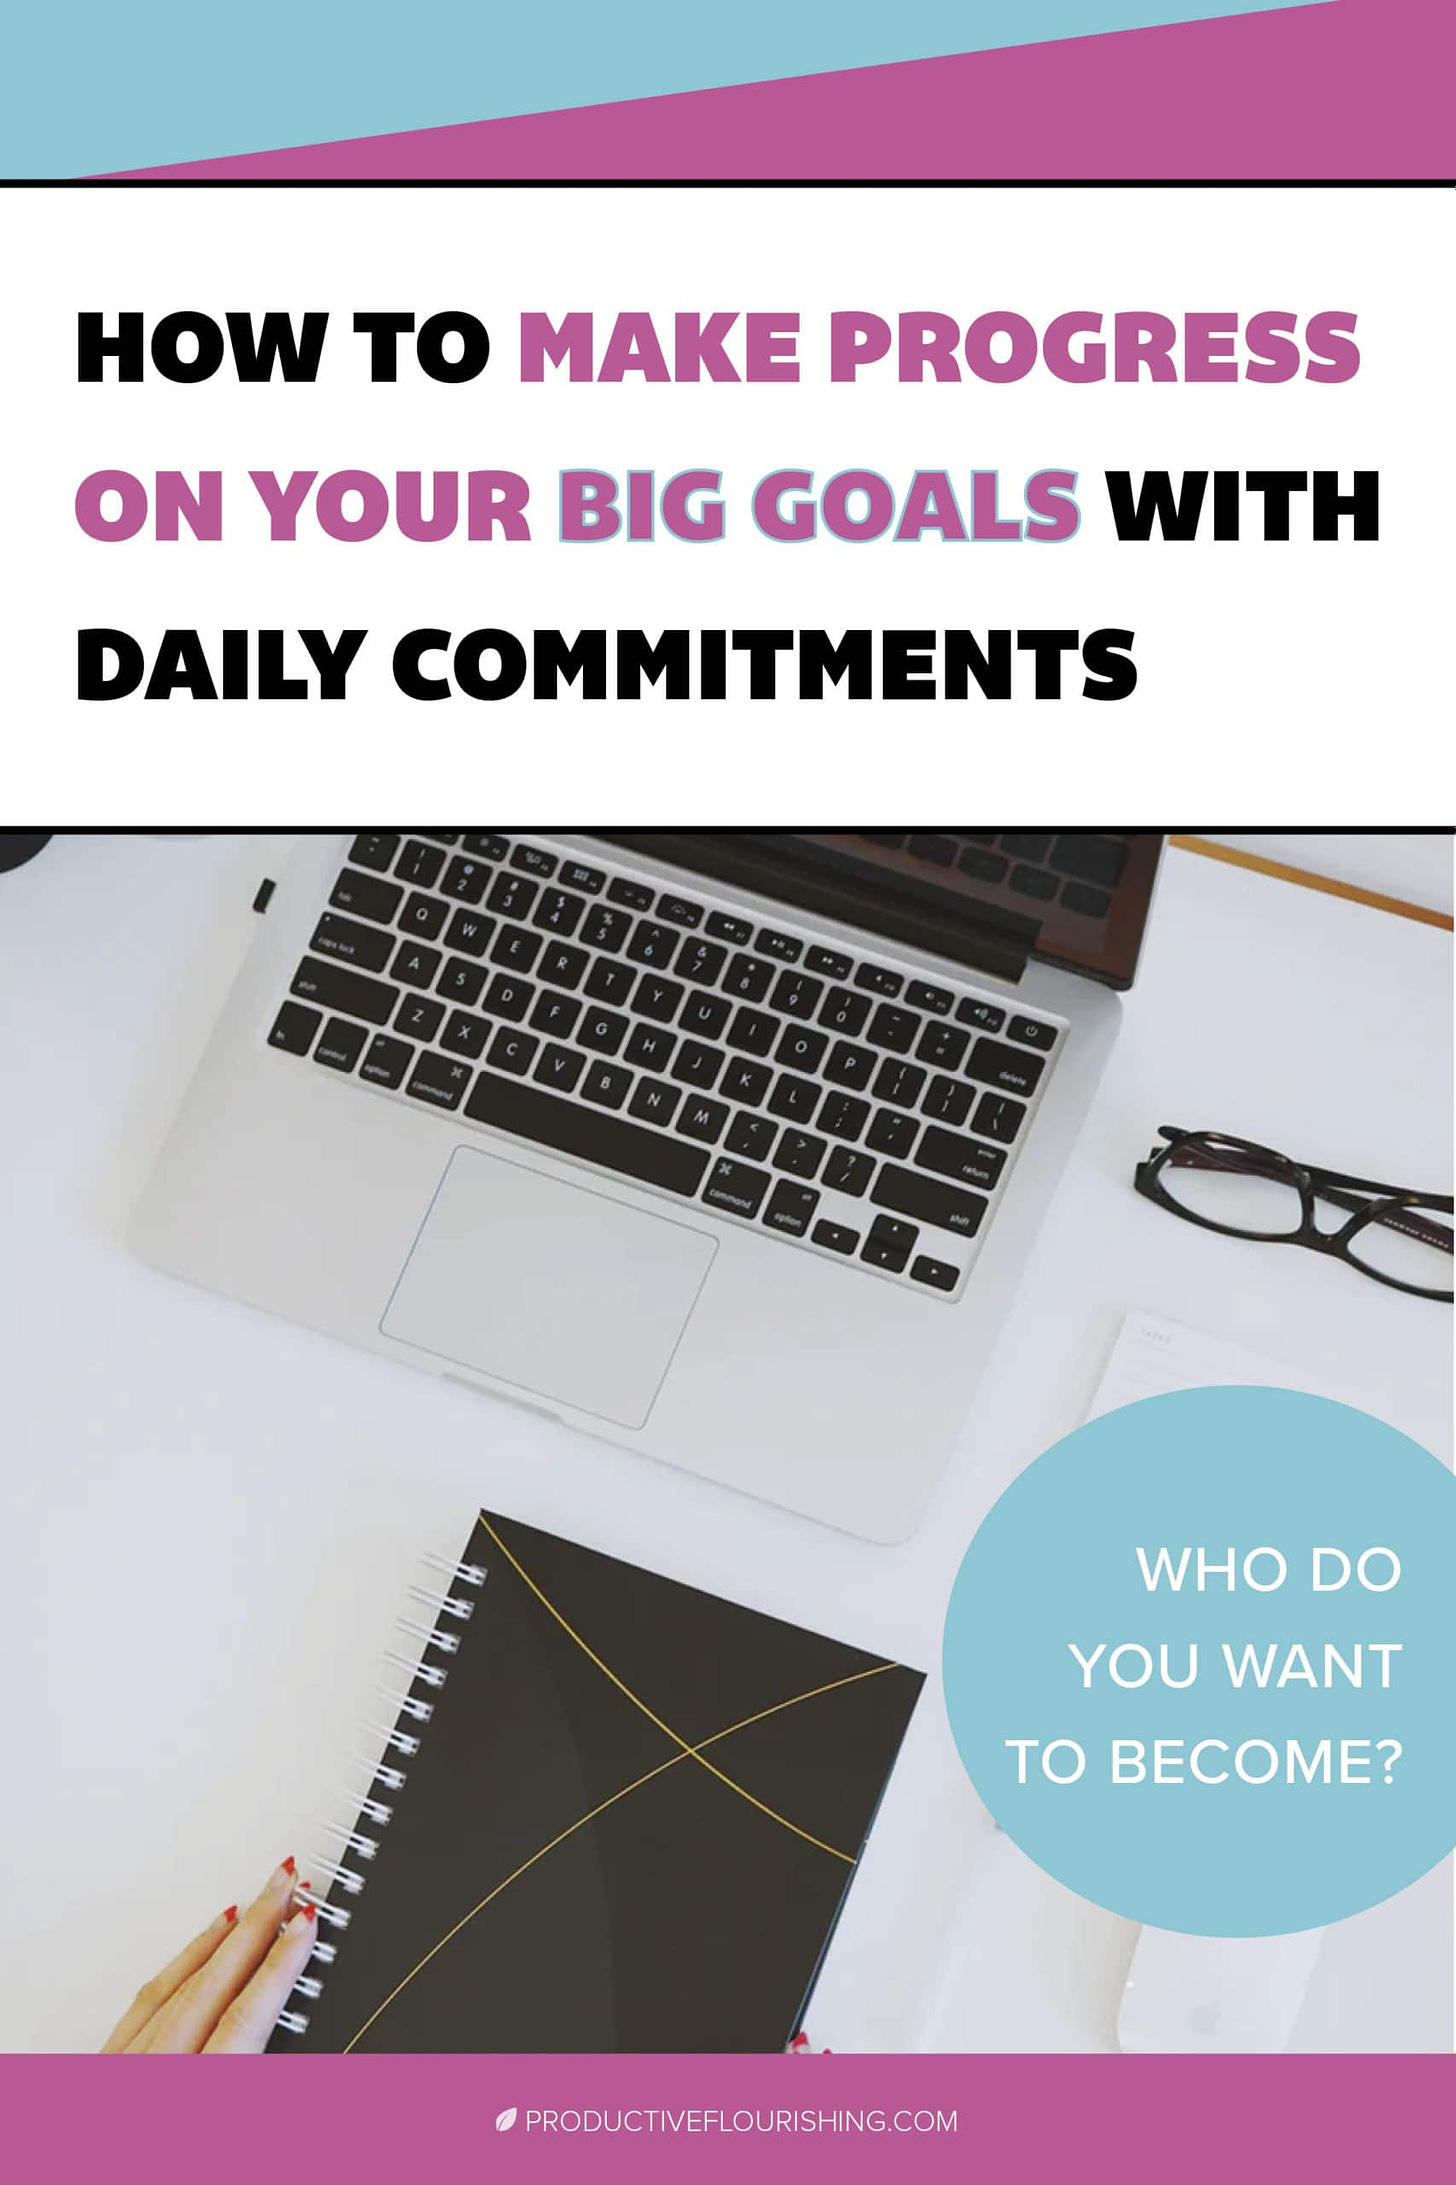 Learn how to reach your biggest goals with small commitments each day. Instead of large efforts for huge wins, it's about the intentional 